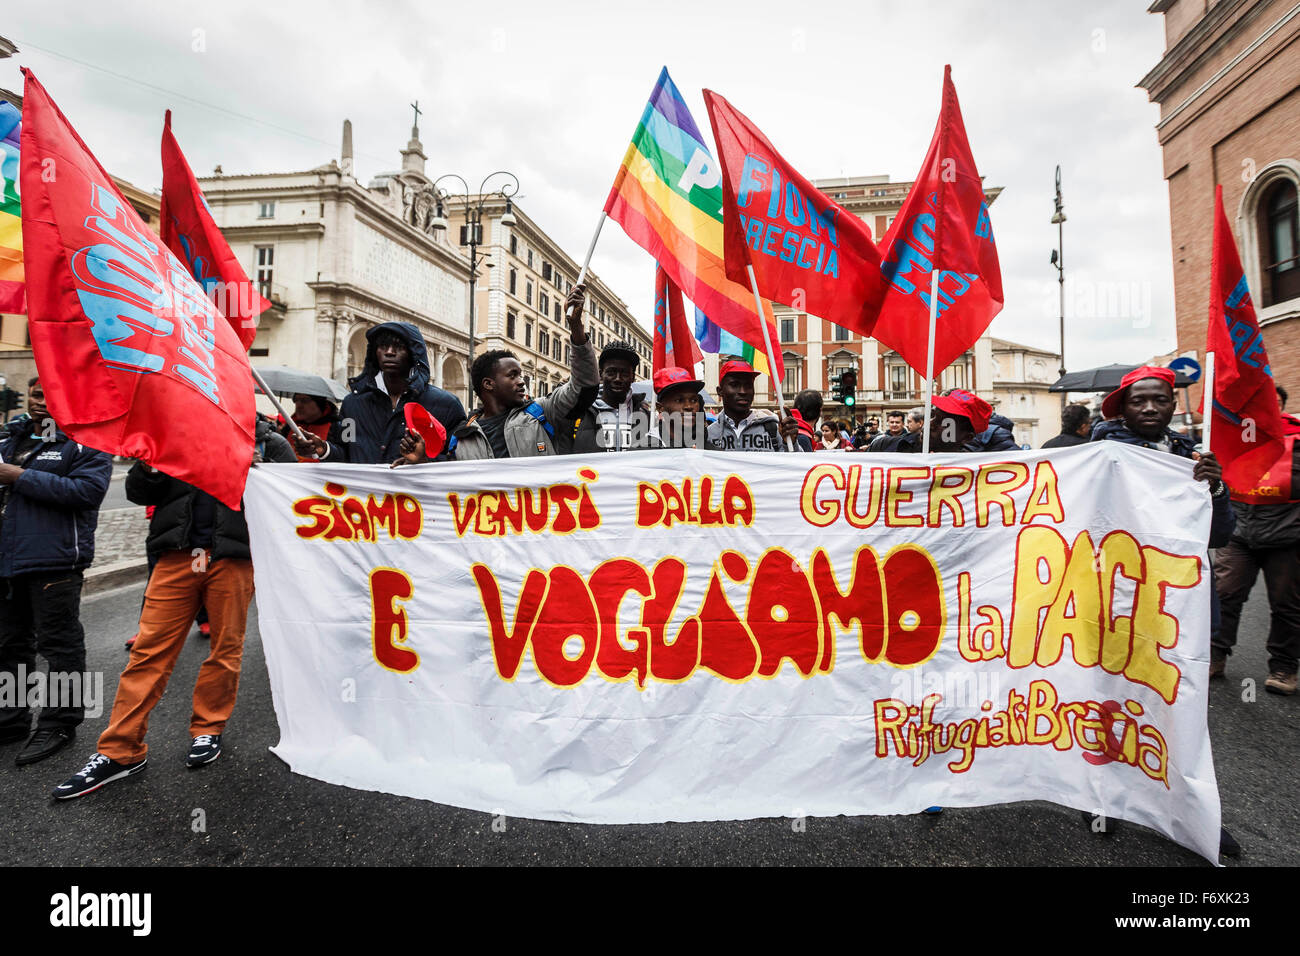 Rome, Italy. 21st Nov, 2015. Members of the Italian trade union FIOM CGIL take part in an anti-government rally to protest against the Italian government's 'Stability Law'. Thousands of demonstrators take part in an anti-government rally called by FIOM CGIL, Italy's metalworkers' trade union, in downtown Rome to protest against the Italian government's 'Stability Law'. Credit:  Giuseppe Ciccia/Pacific Press/Alamy Live News Stock Photo